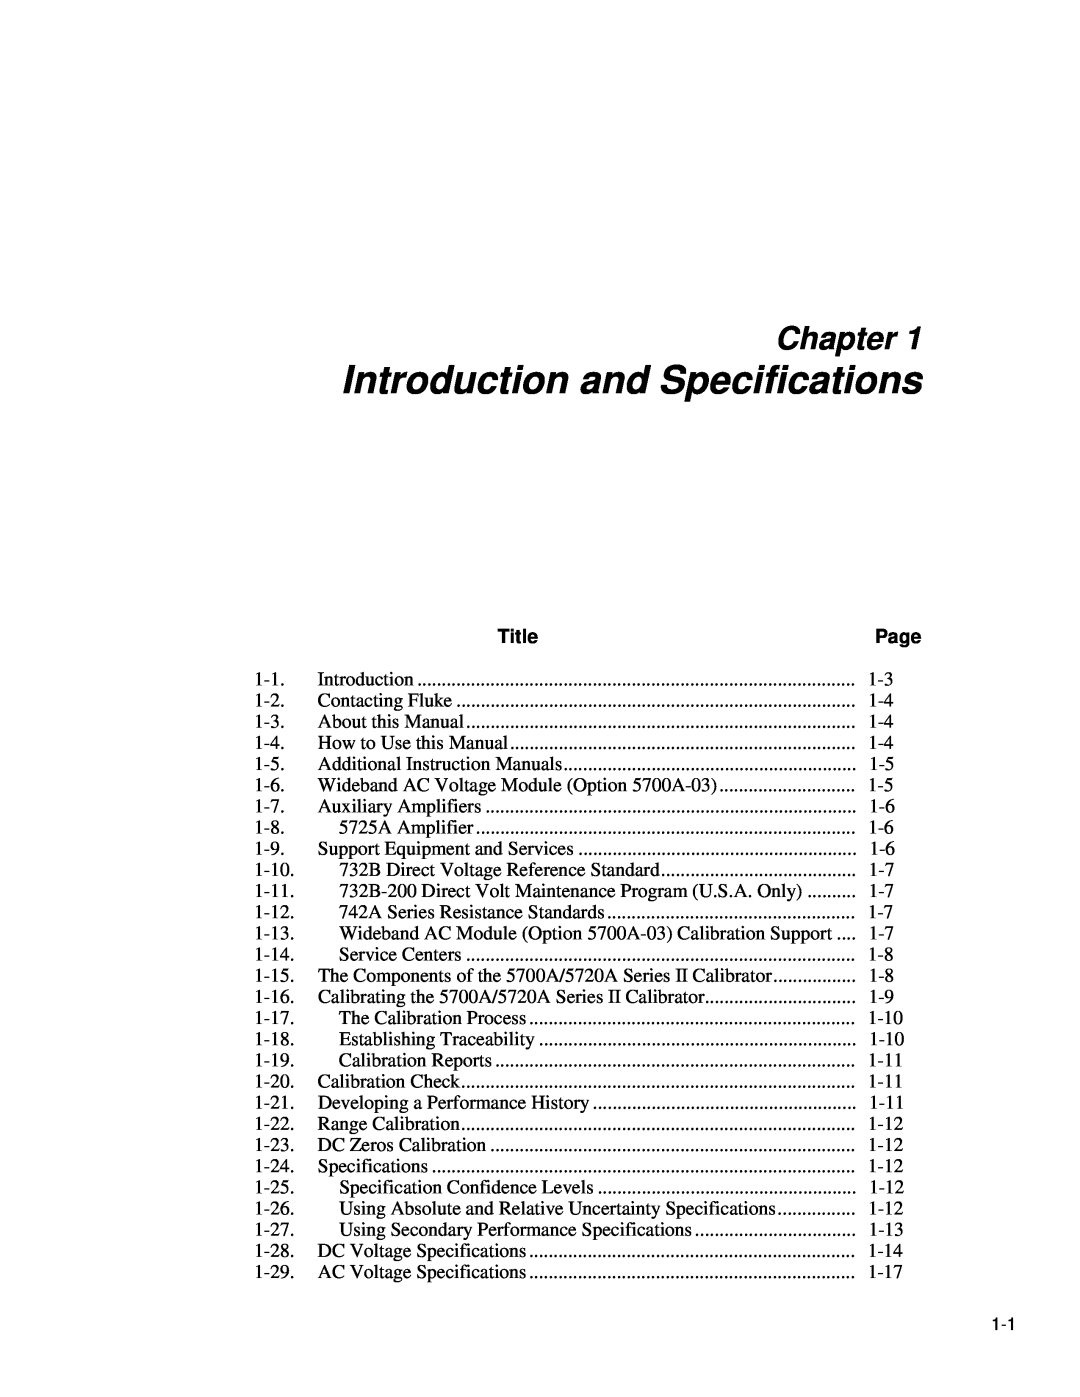 Fluke 5720A service manual Introduction and Specifications, Chapter, Title 